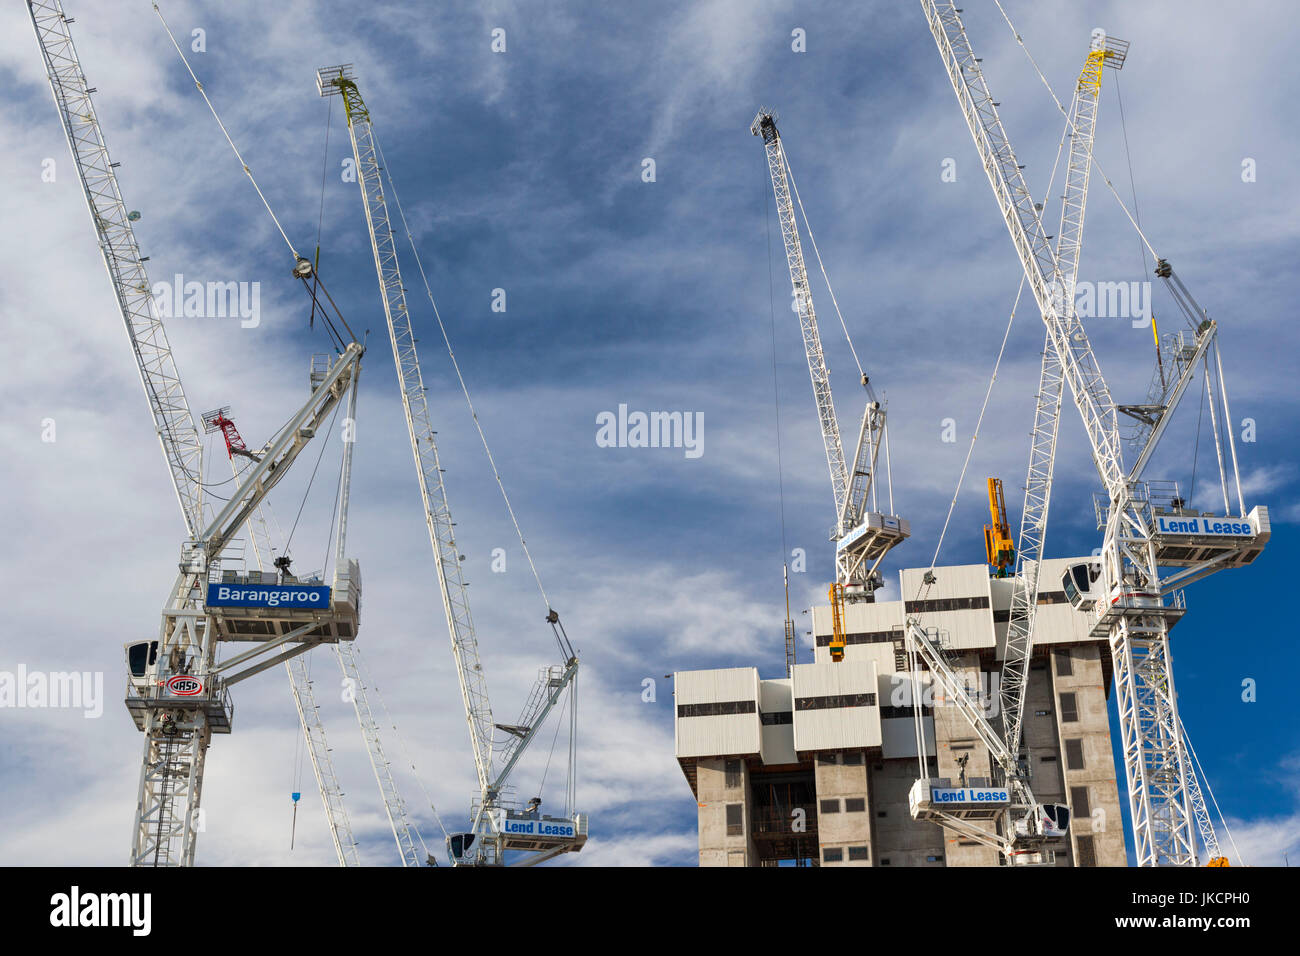 Australia, New South Wales, NSW, Sydney, constriction cranes, Barangaroo Project, Millers Point Stock Photo